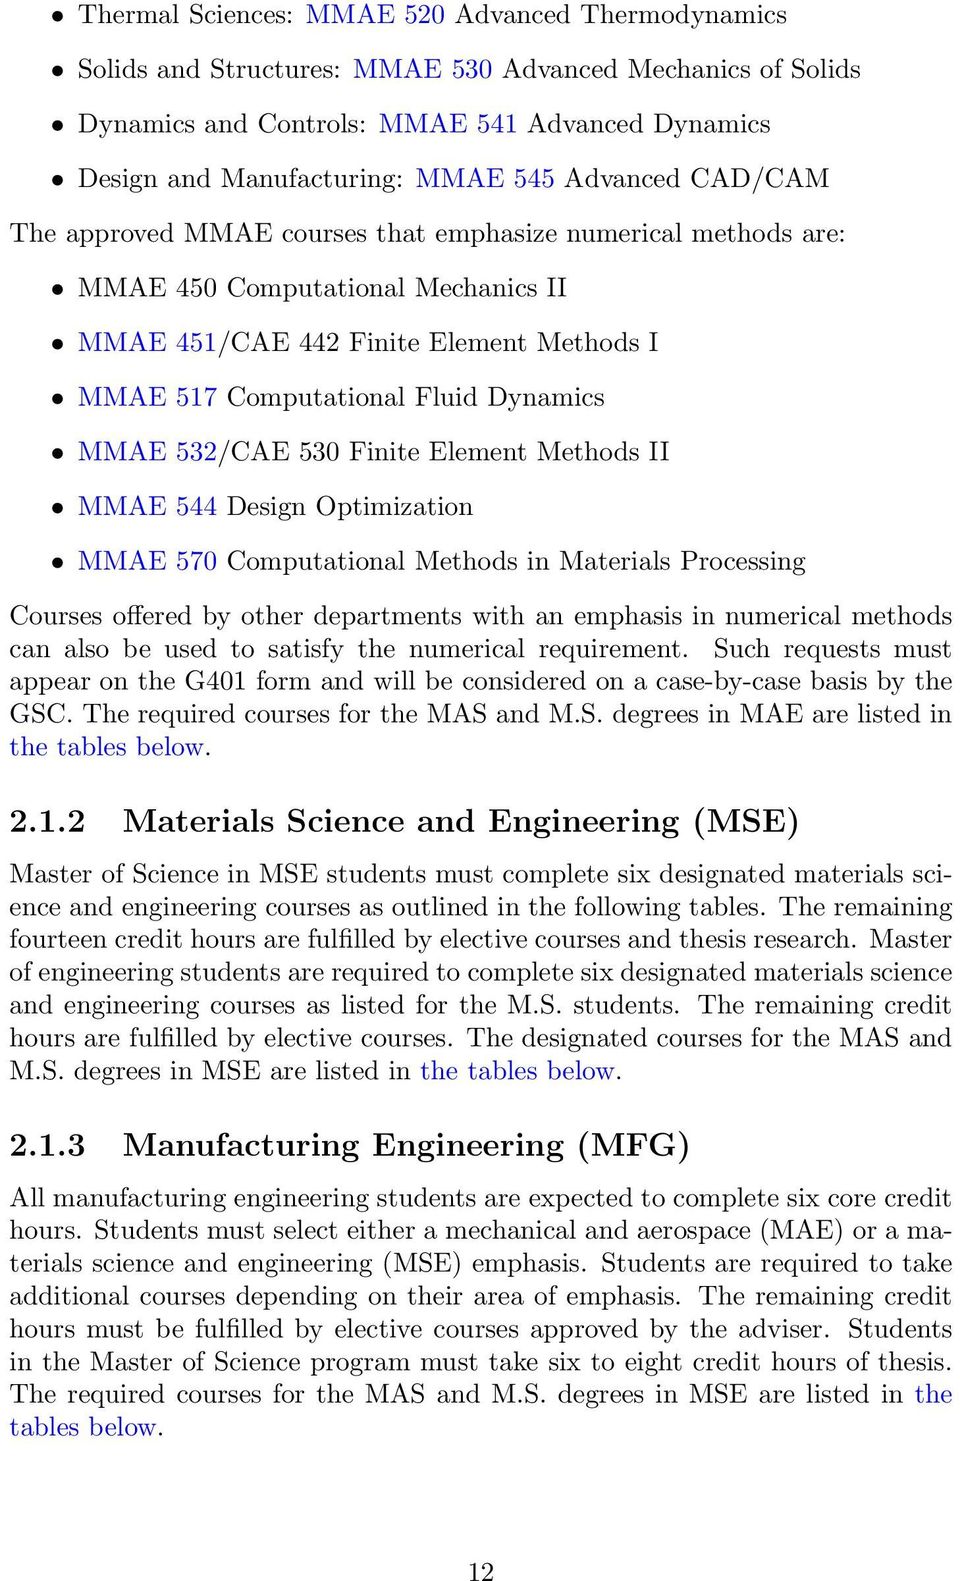 MMAE 532/CAE 530 Finite Element Methods II MMAE 544 Design Optimization MMAE 570 Computational Methods in Materials Processing Courses offered by other departments with an emphasis in numerical